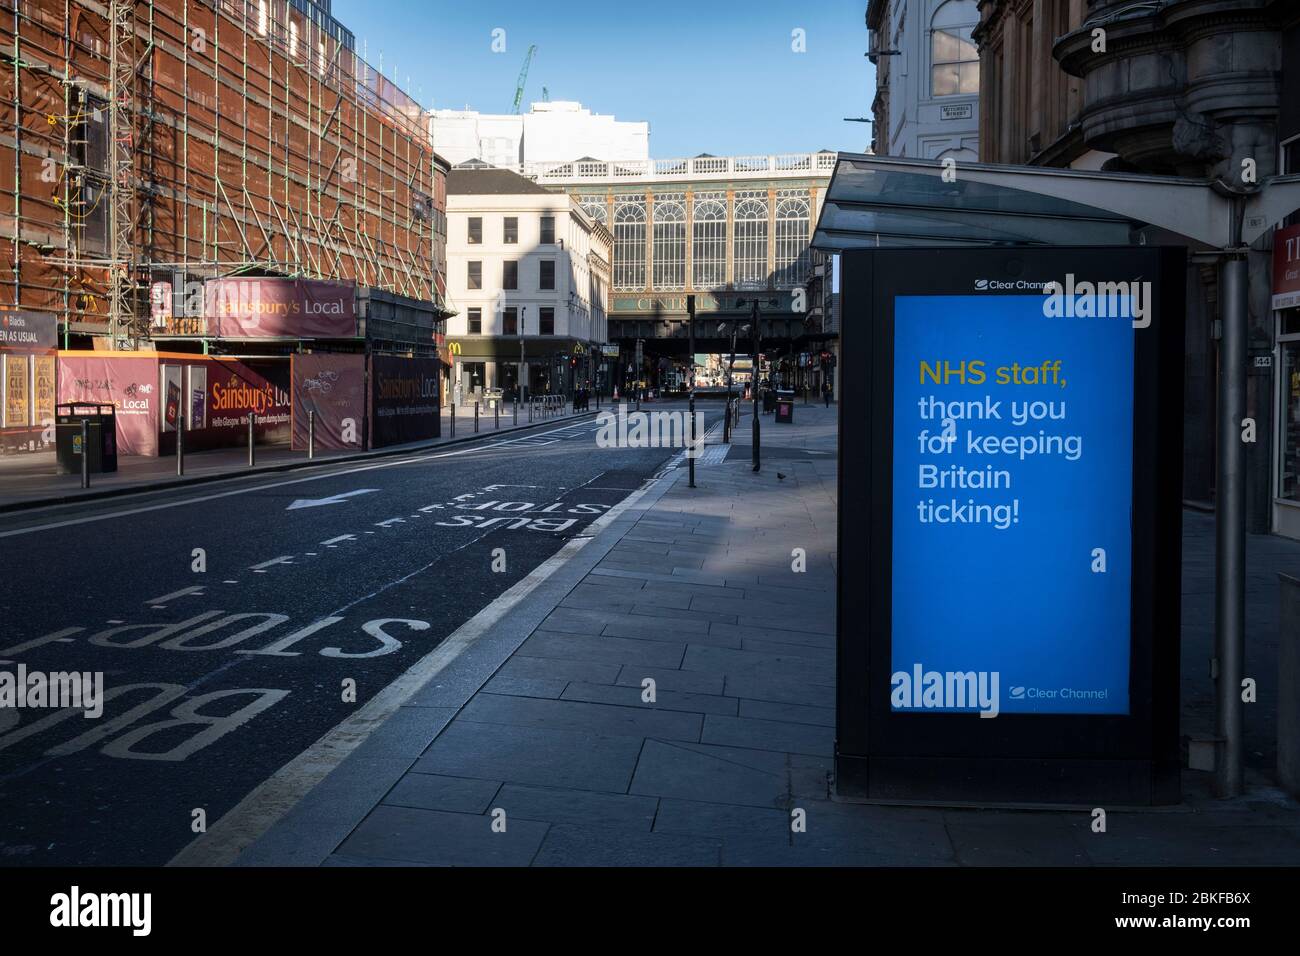 NHS sign on a bus shelter on Argyll Street in Glasgow during the Covid-19 lockdown. Stock Photo